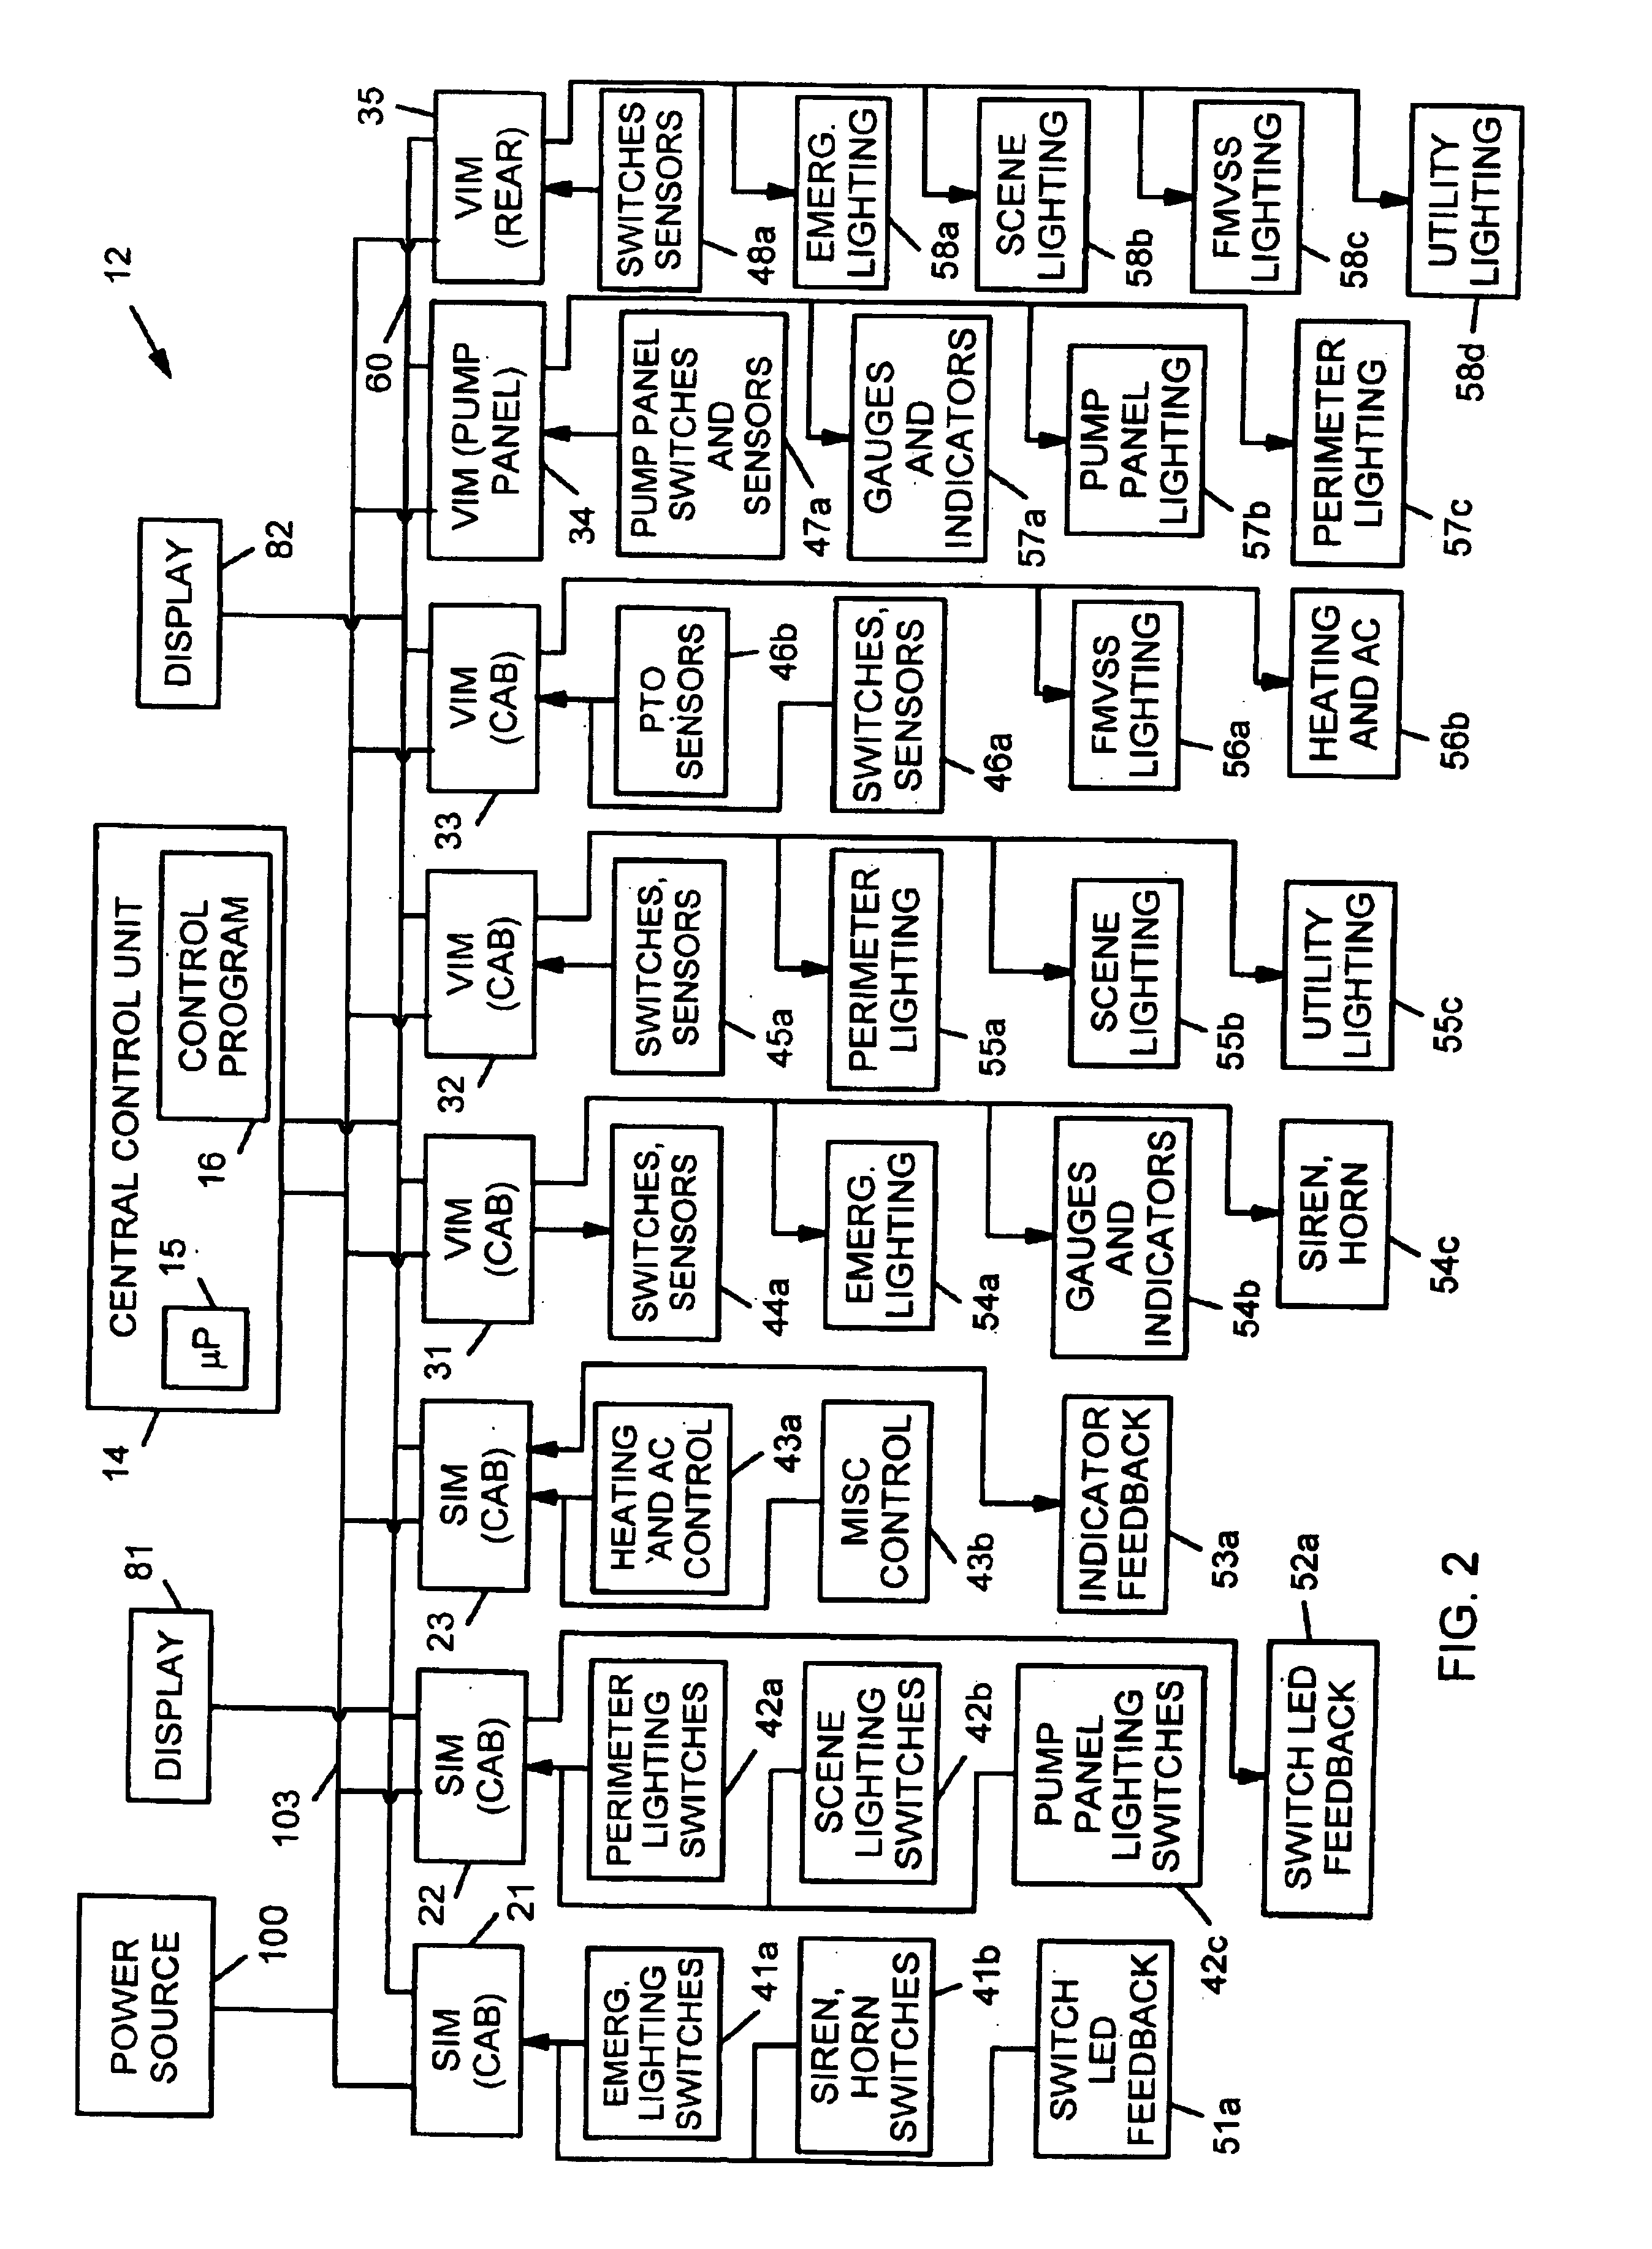 Control system and method for an equipment service vehicle